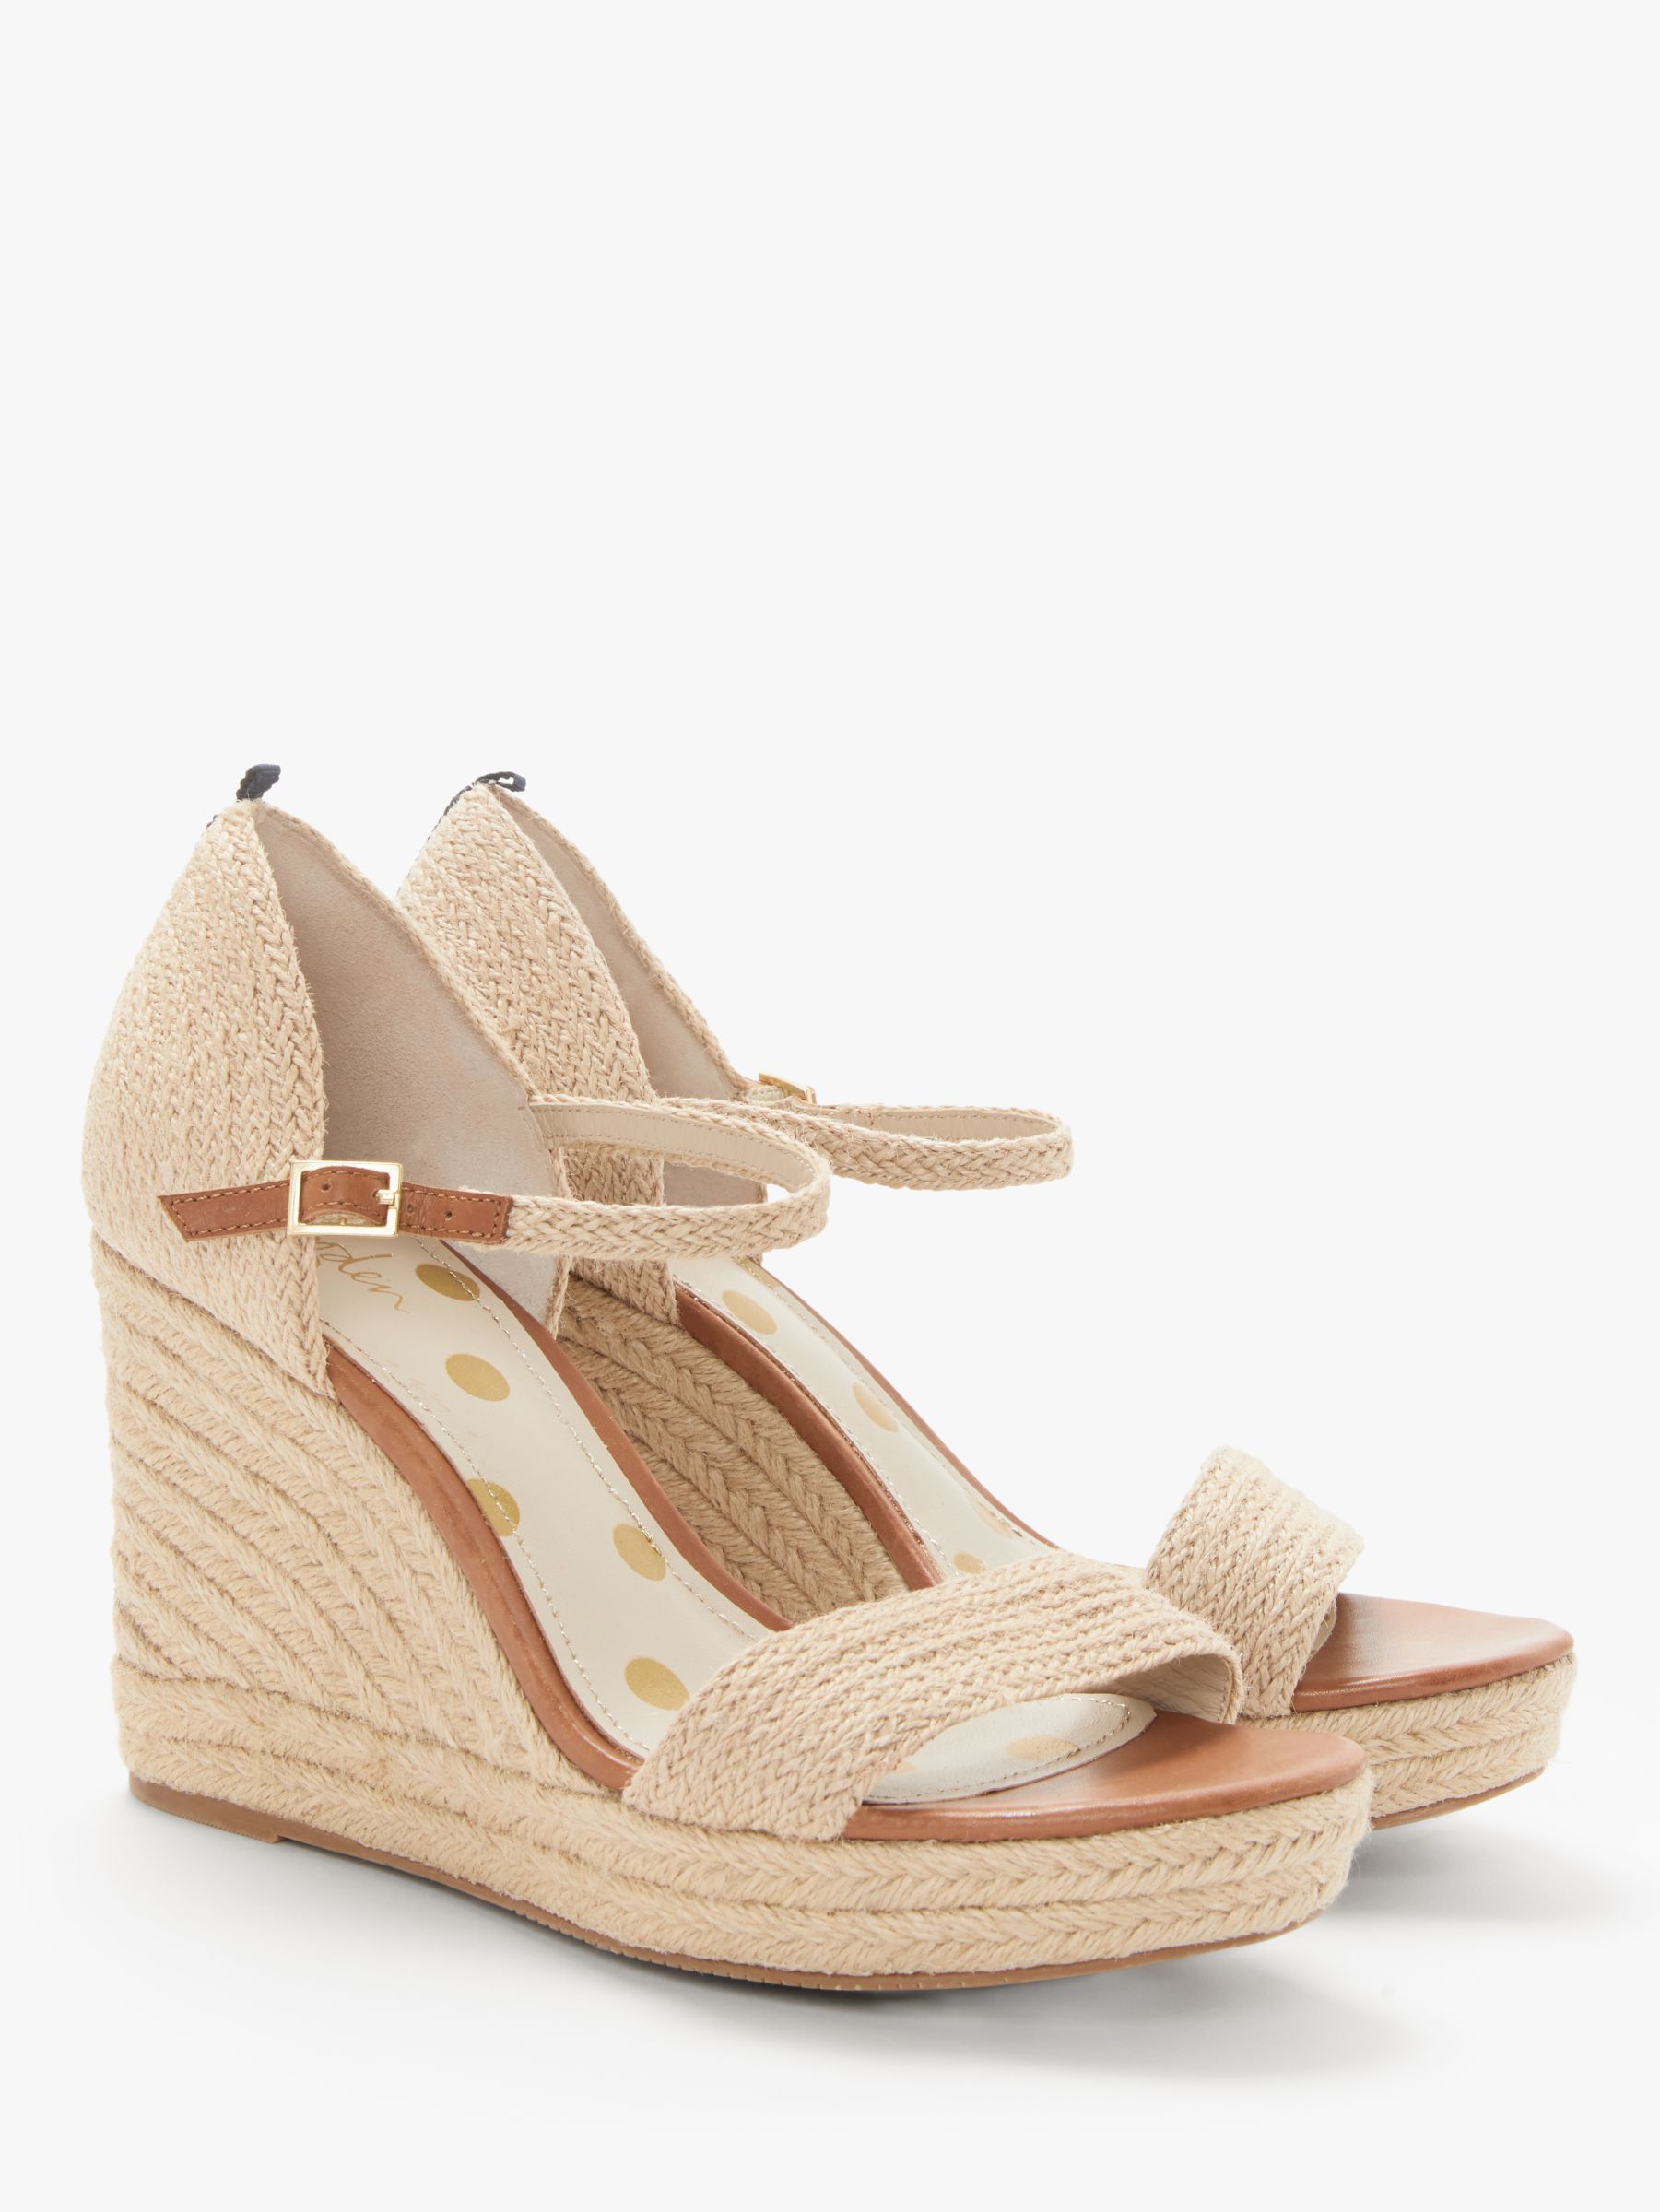 Boden Lily Espadrille Wedges, Natural